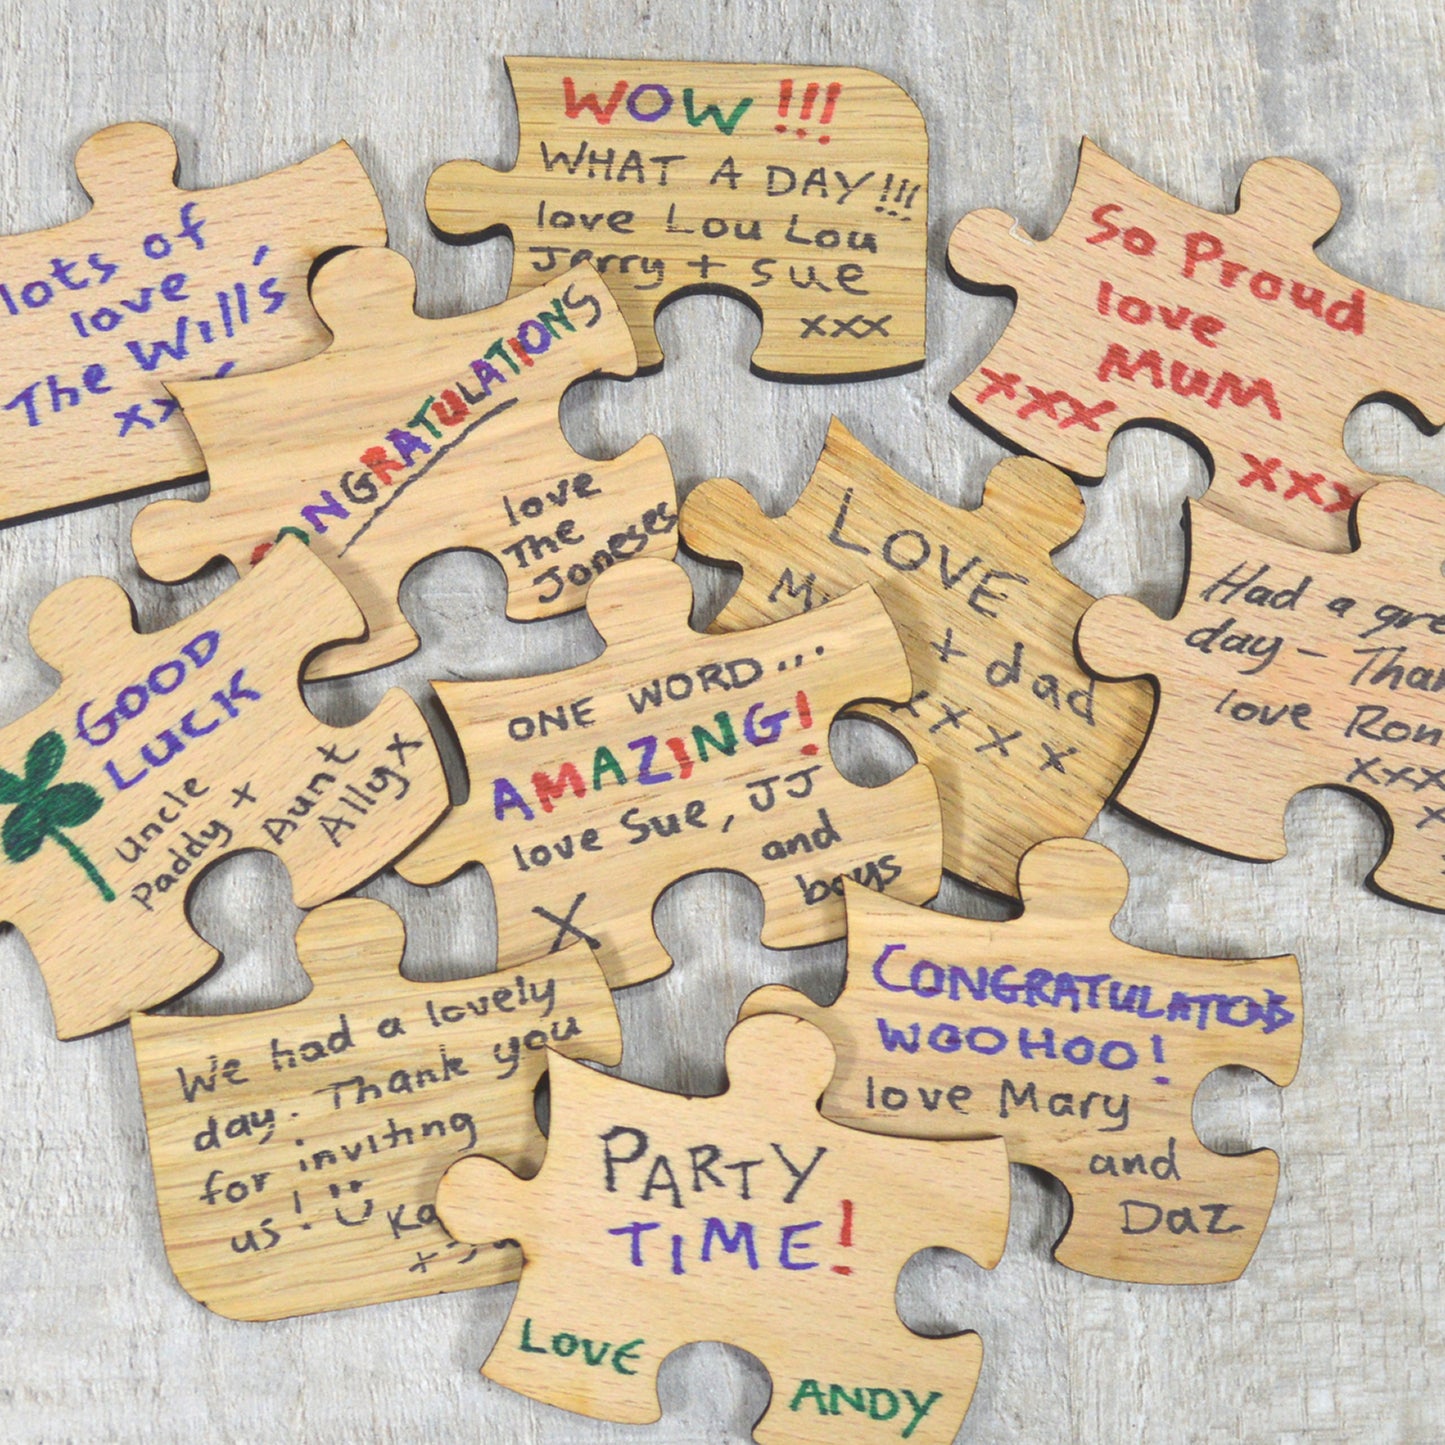 Hen Party Guestbook - Personalised Heart Shaped Jigsaw Puzzle